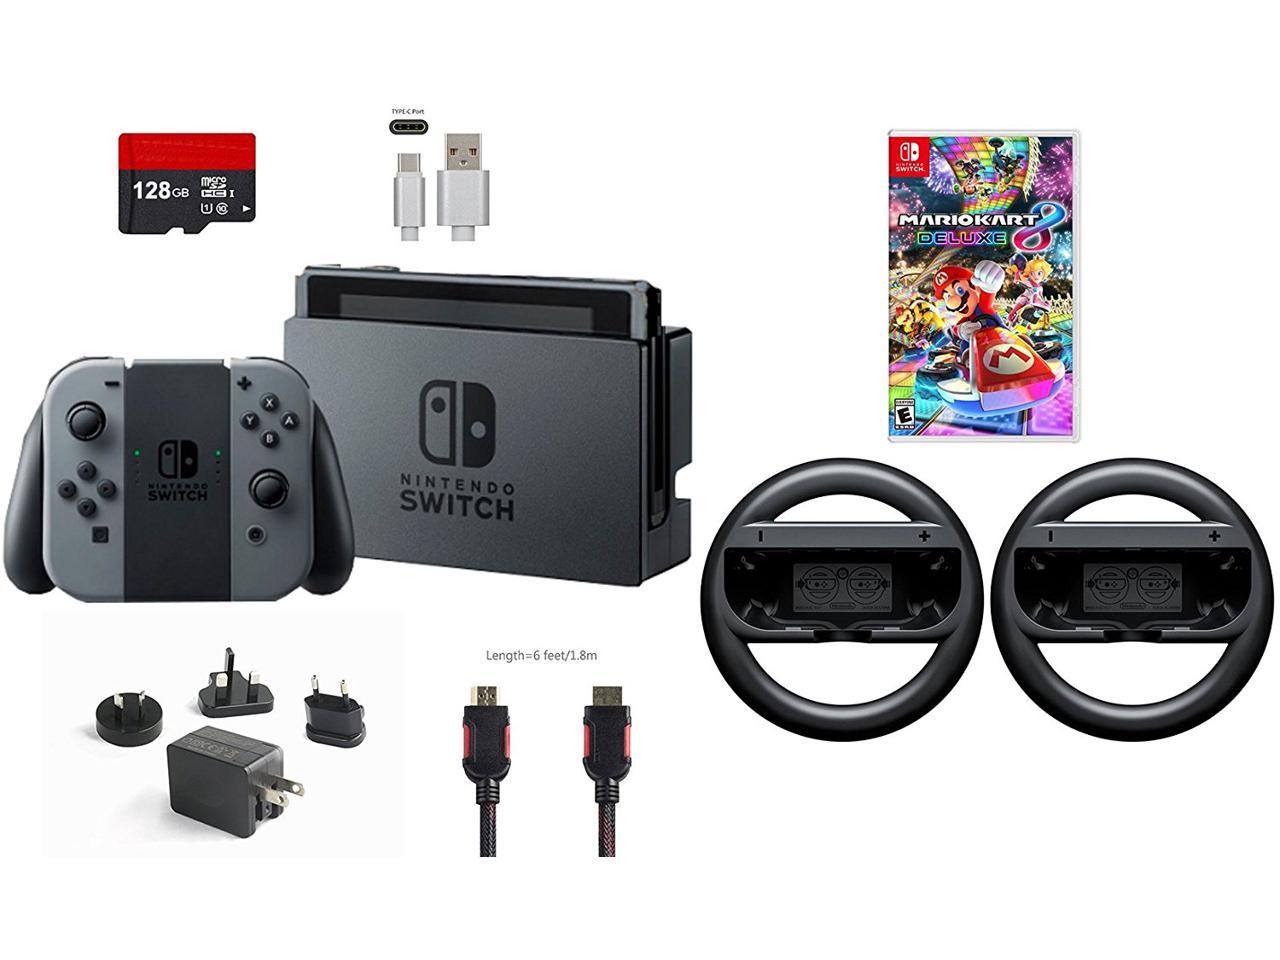 does nintendo switch come with hdmi cable